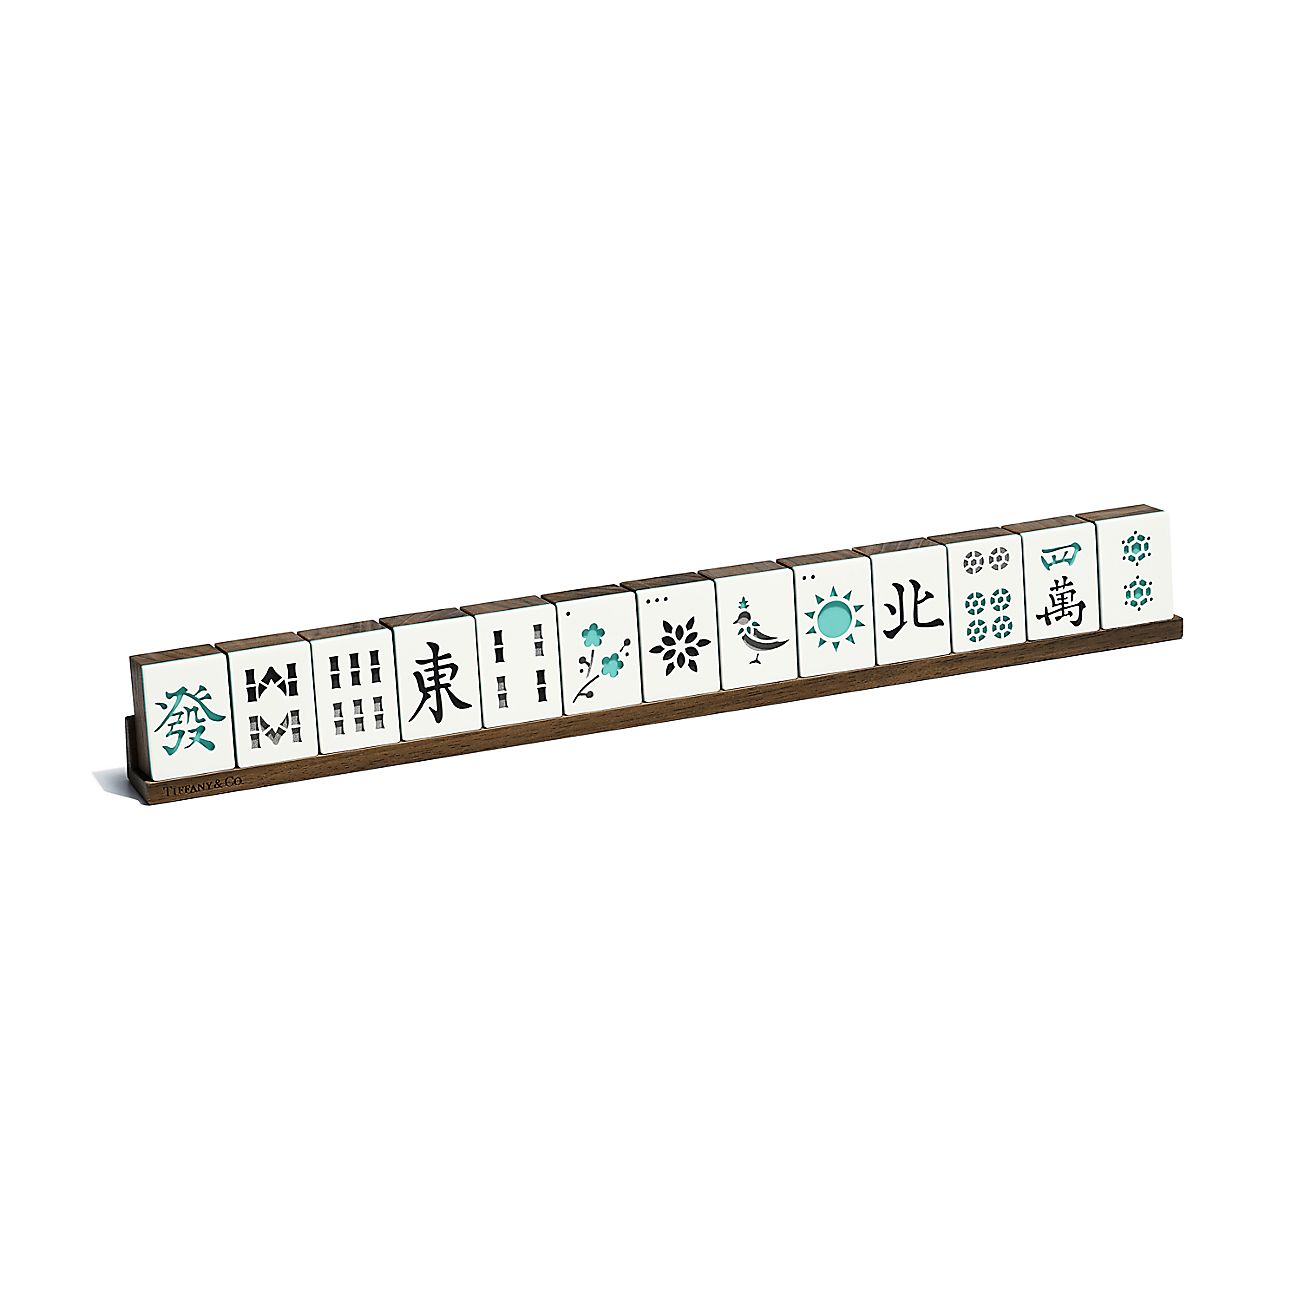 Tiffany & Co. releases luxurious mahjong set. It'll cost you US